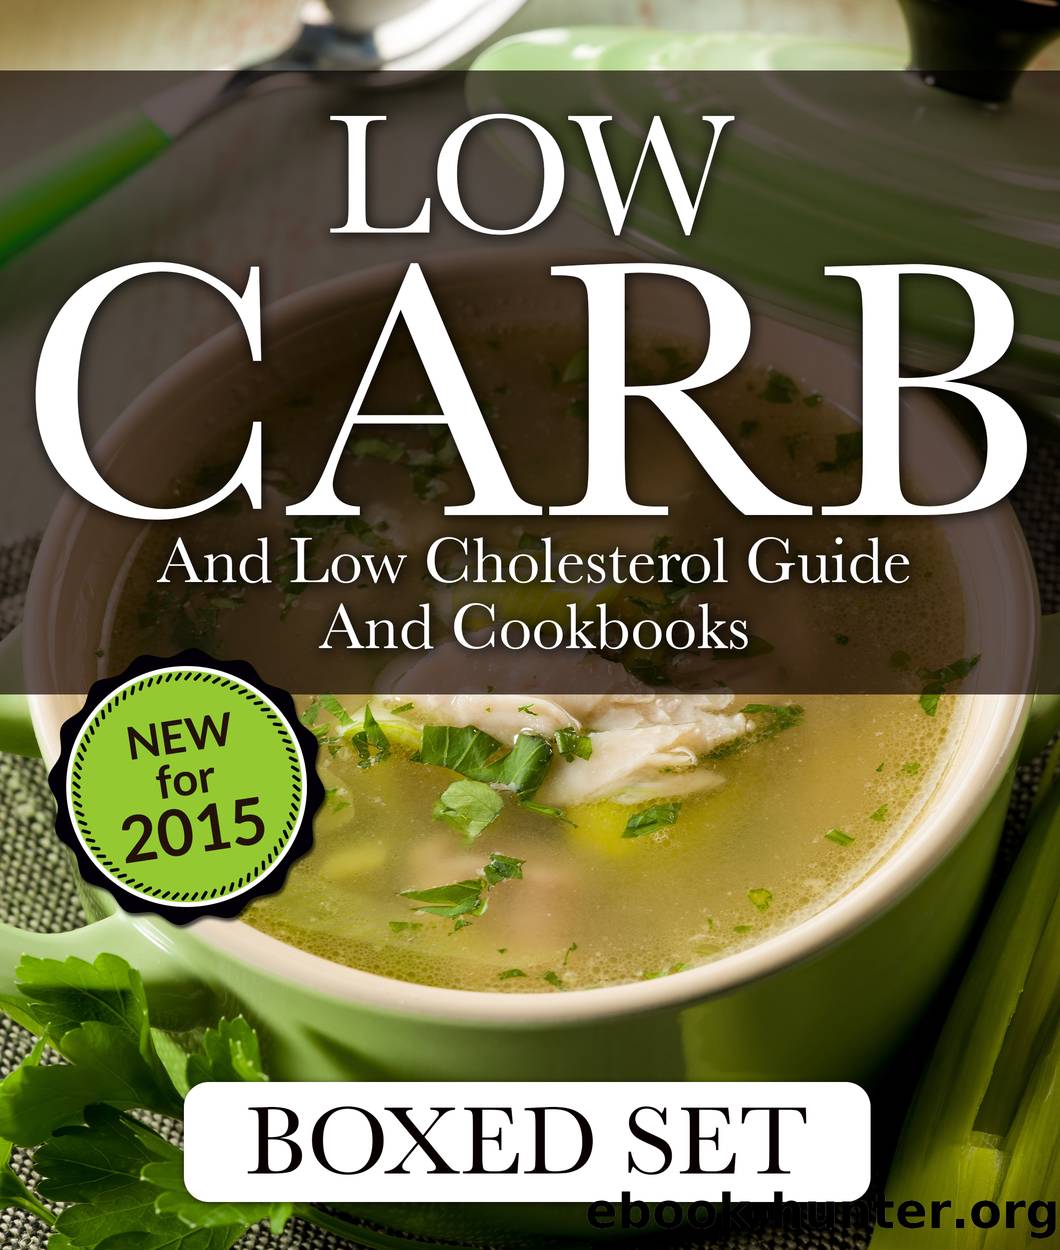 Low Carb and Low Cholesterol Guide and Cookbooks by Speedy Publishing